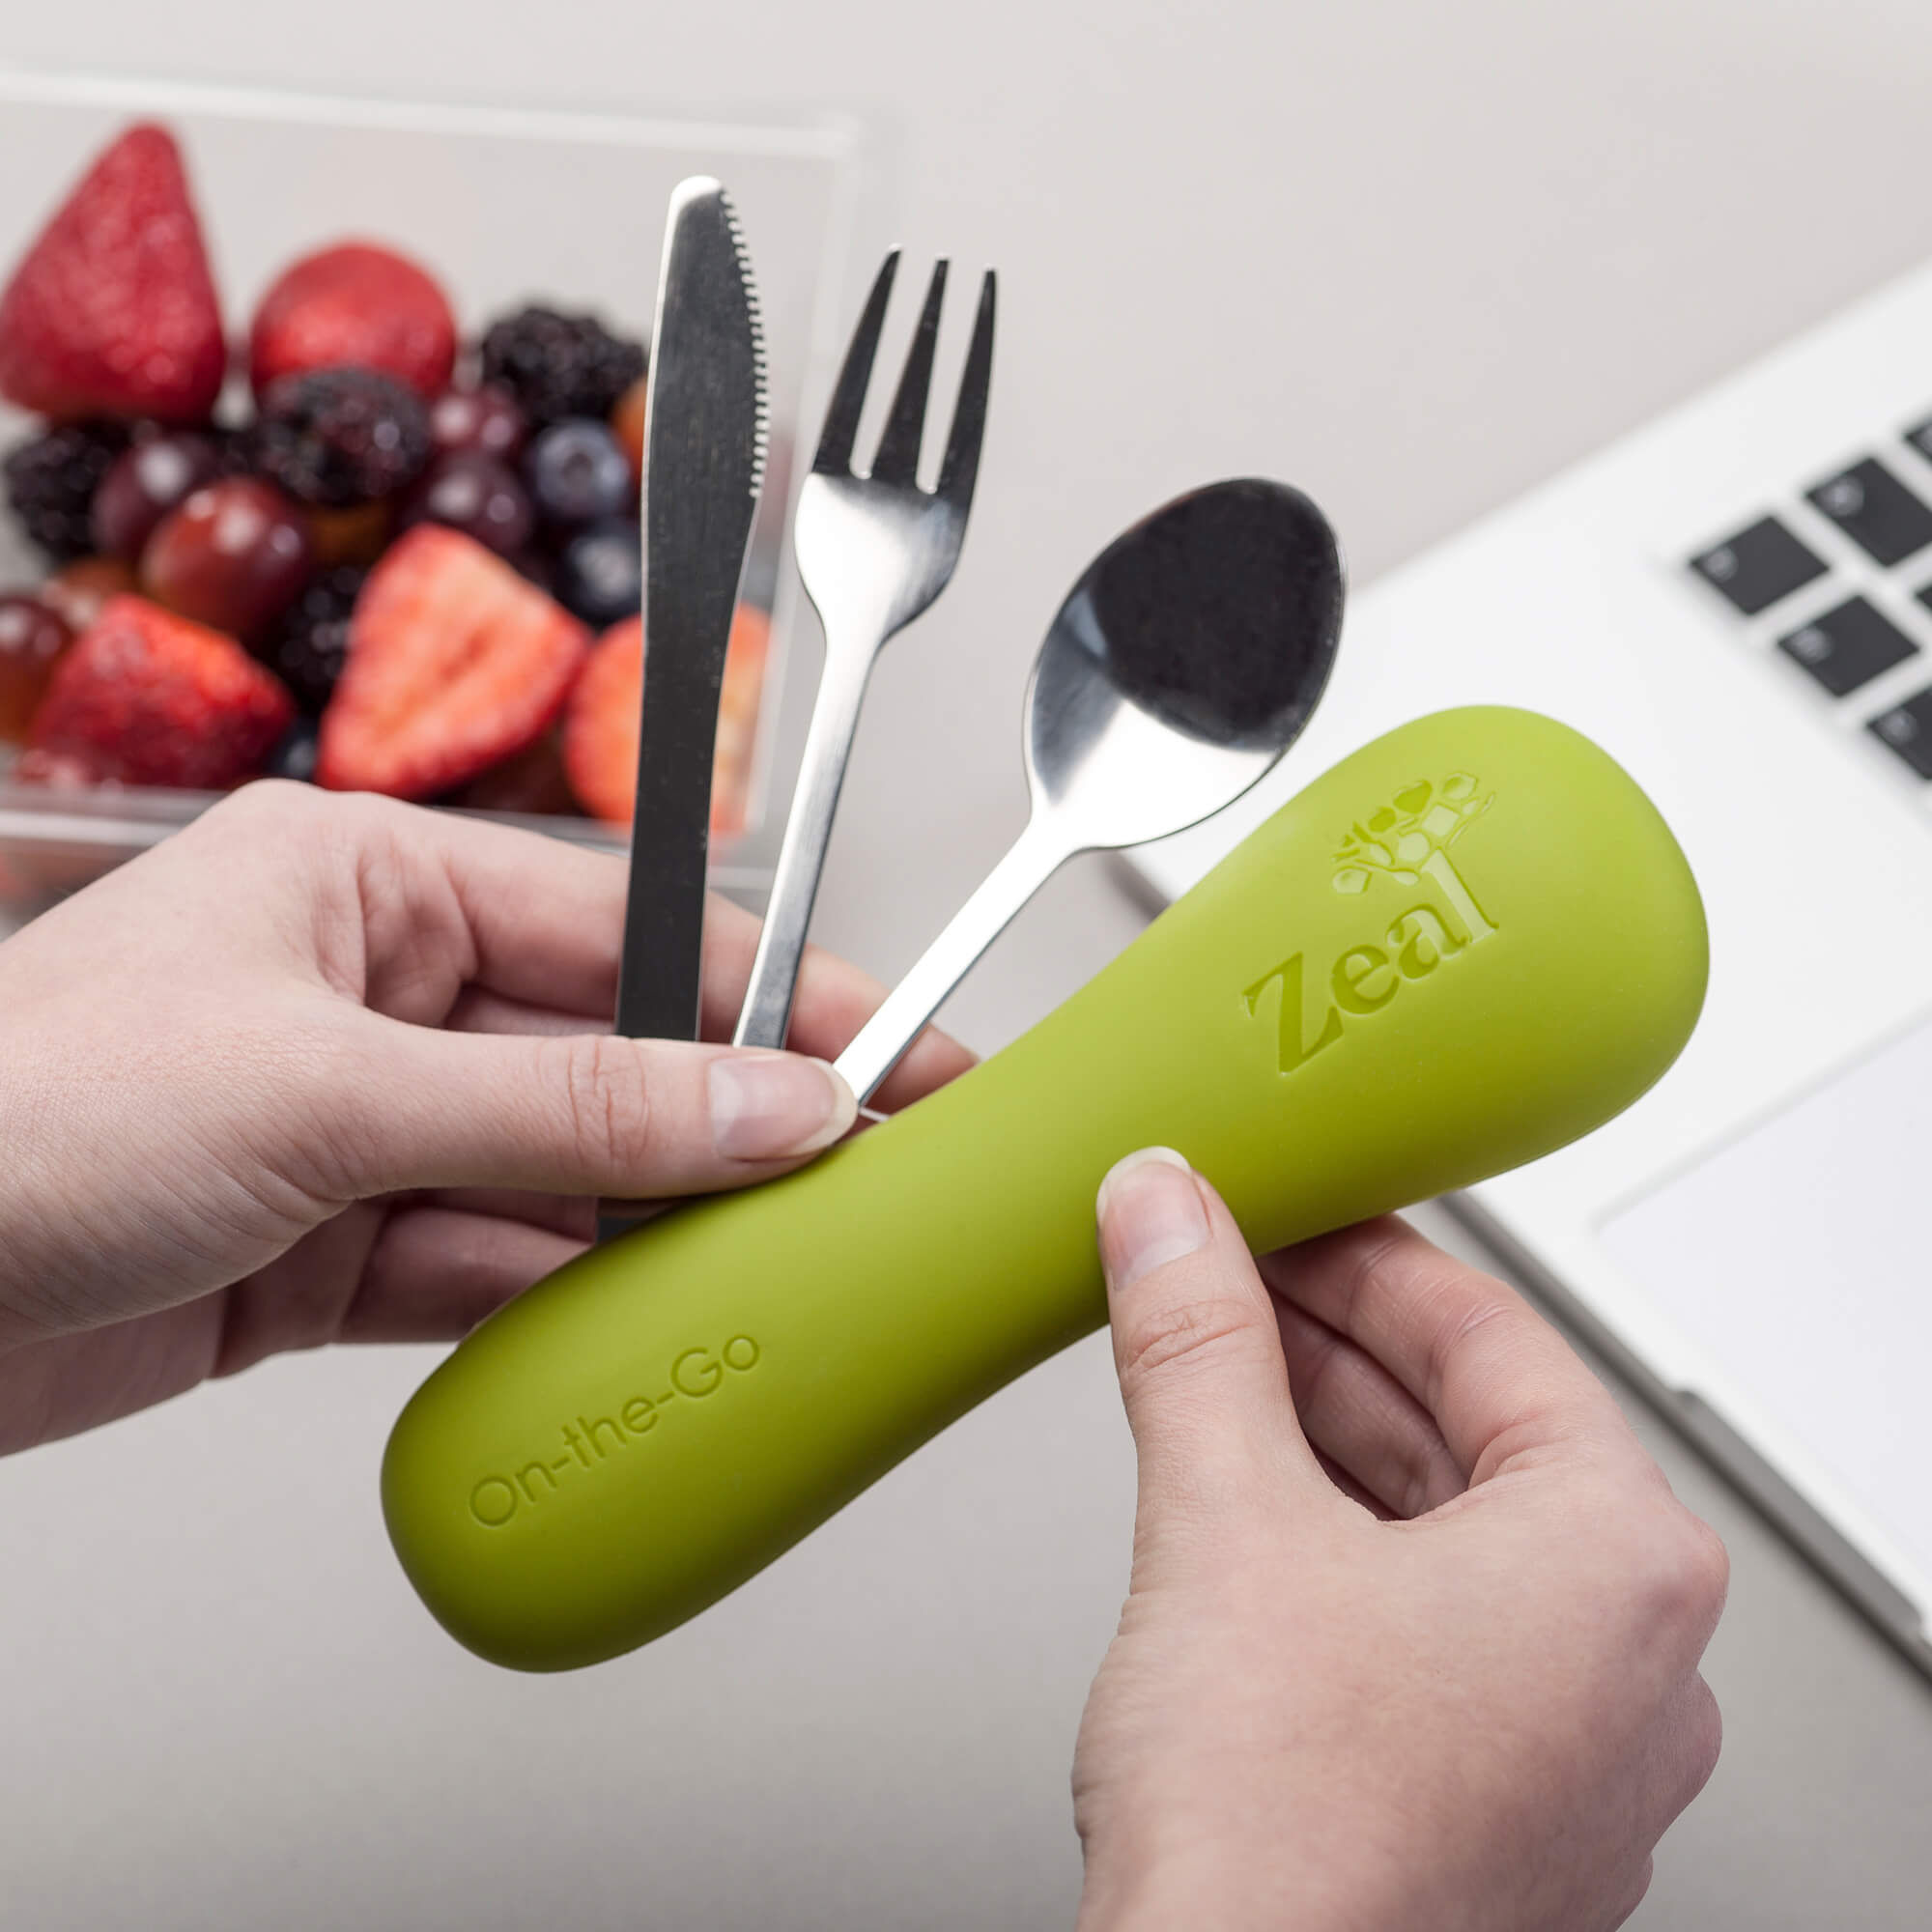 Zeal On The Go Cutlery Set in use at a desk